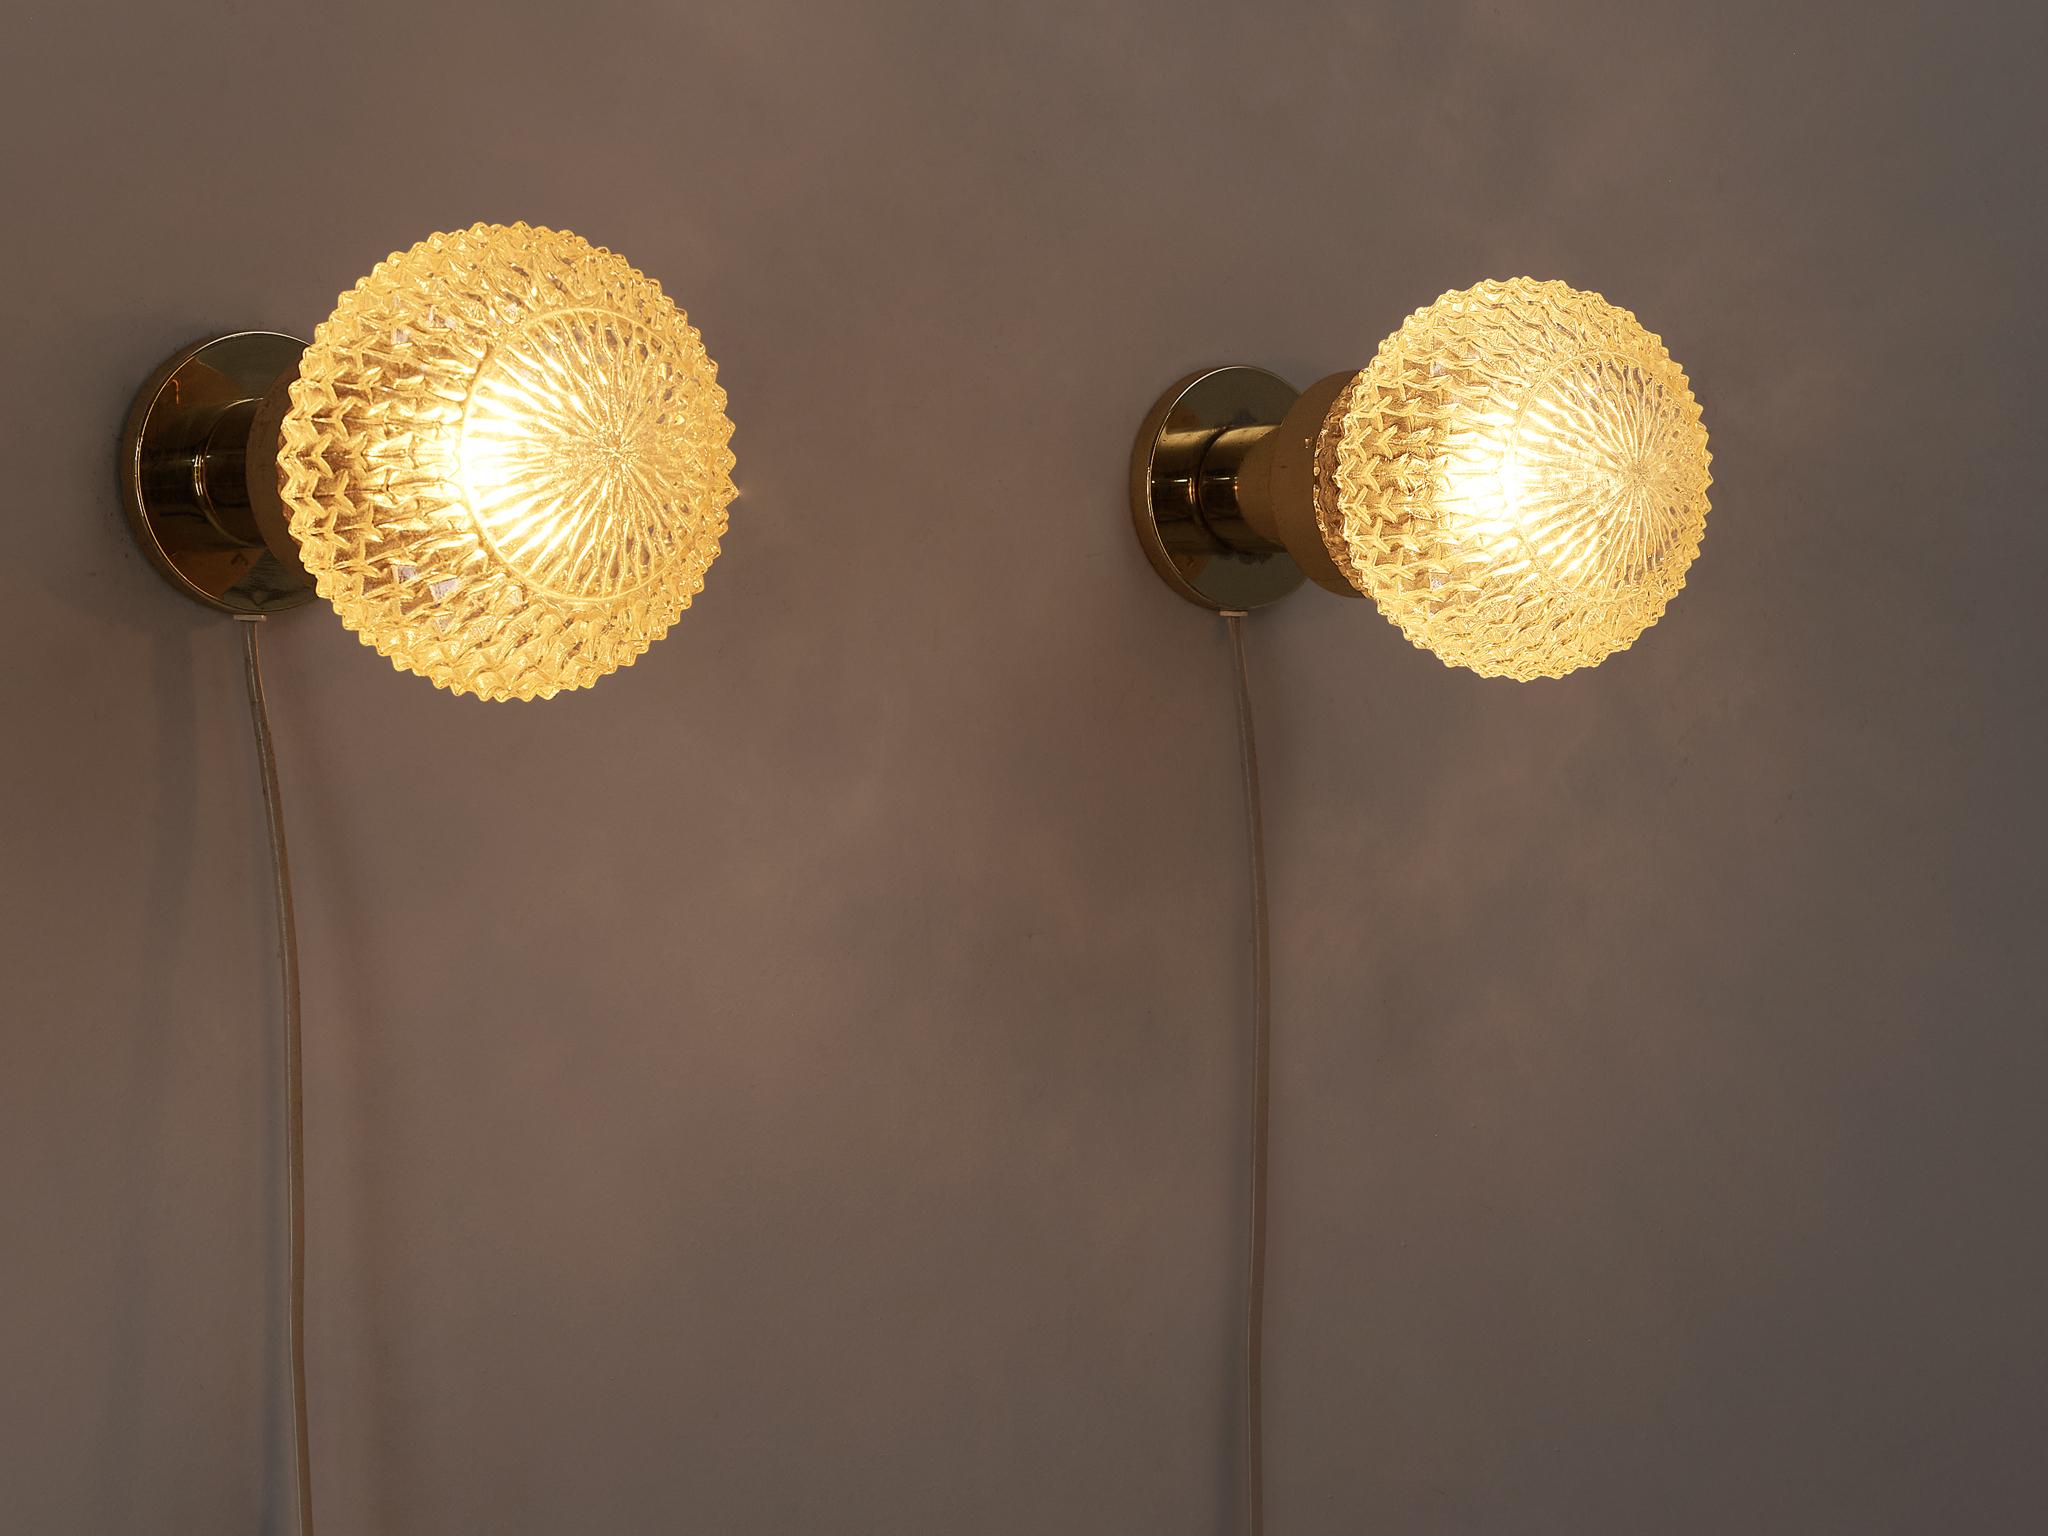 Wall lights, glass, brass, metal, Czech Republic, 1960s.

These eccentric scones or table lamps are based on a round construction. The structured glass orb with an ocher tone is supported by a round shaped pedestal. The relief surface of the glass